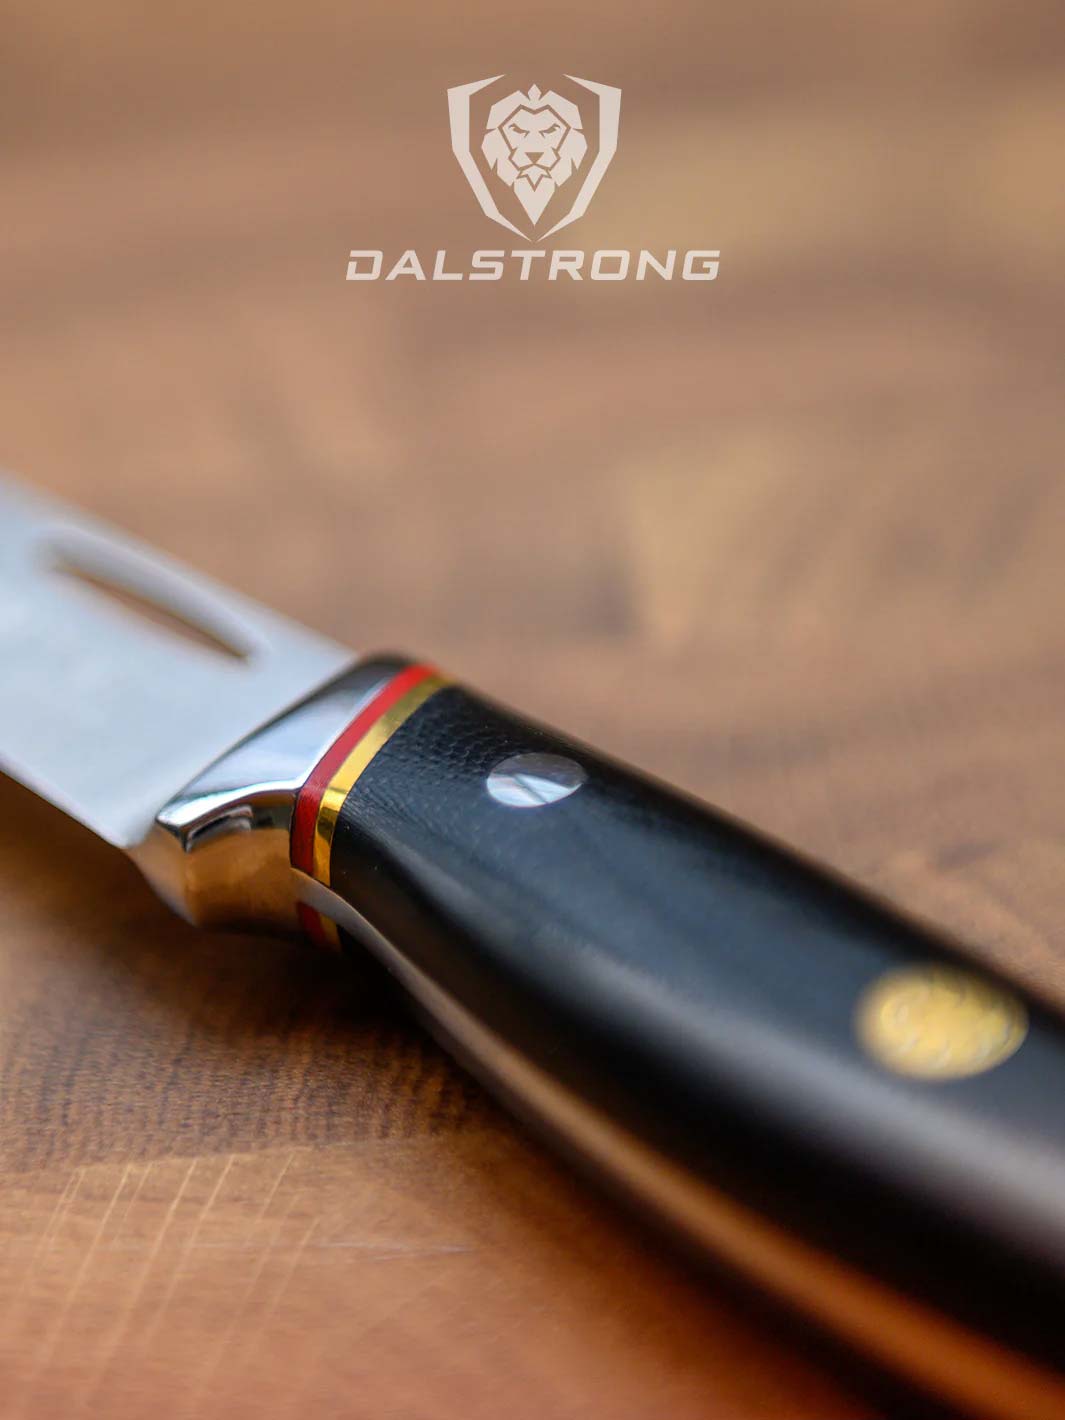 Dalstrong centurion series 3.5 inch paring knife featuring it's ergonomic black handle.